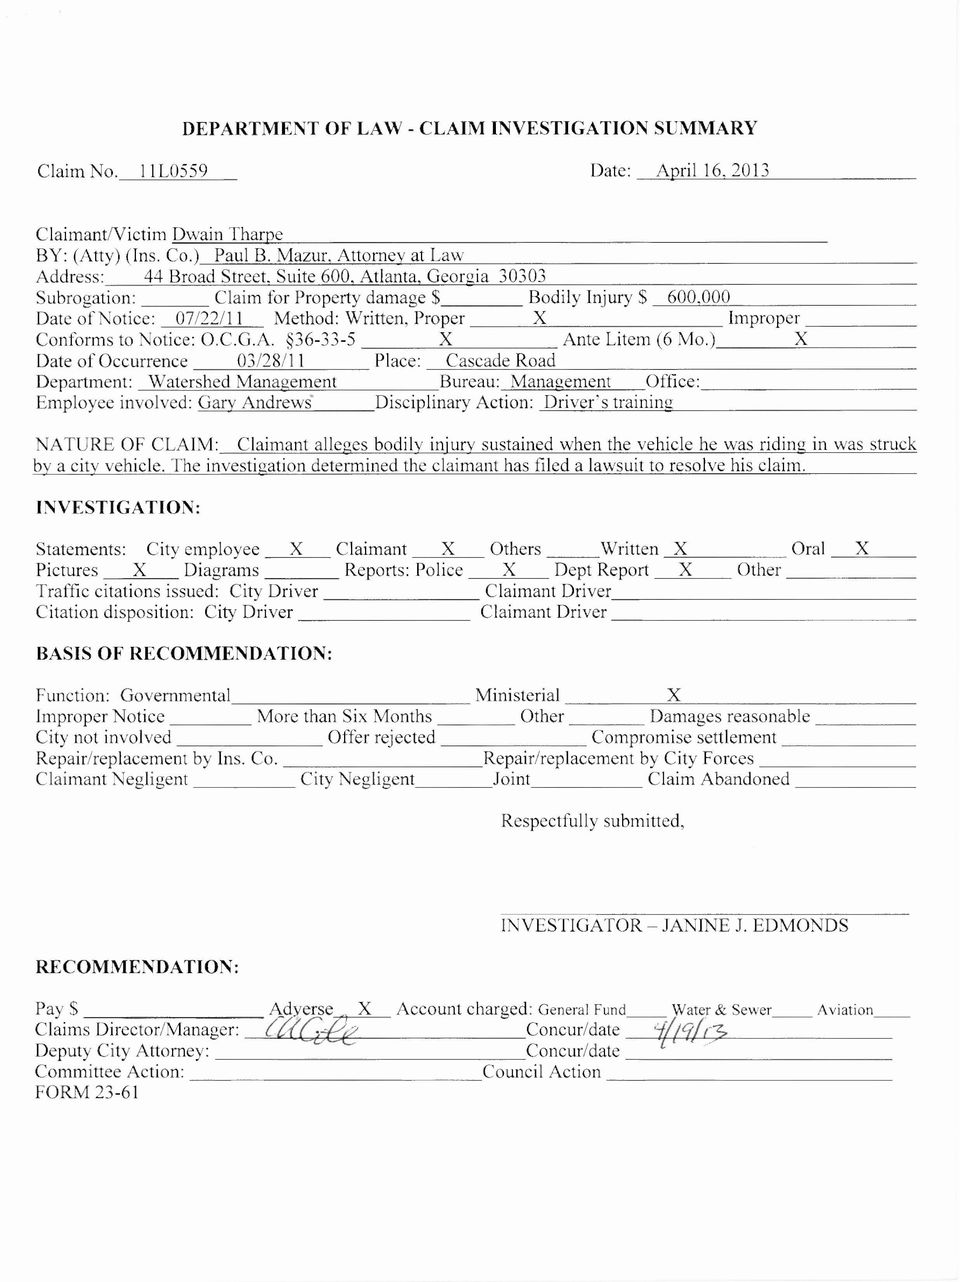 ) X Date of Occurrence 03/28/11 Place: Cascade Road Department: Watershed Management Bureau: Management Office: Employee involved: Gary Andrews Disciplinary Action: Driver's training NATURE OF CLAIM: